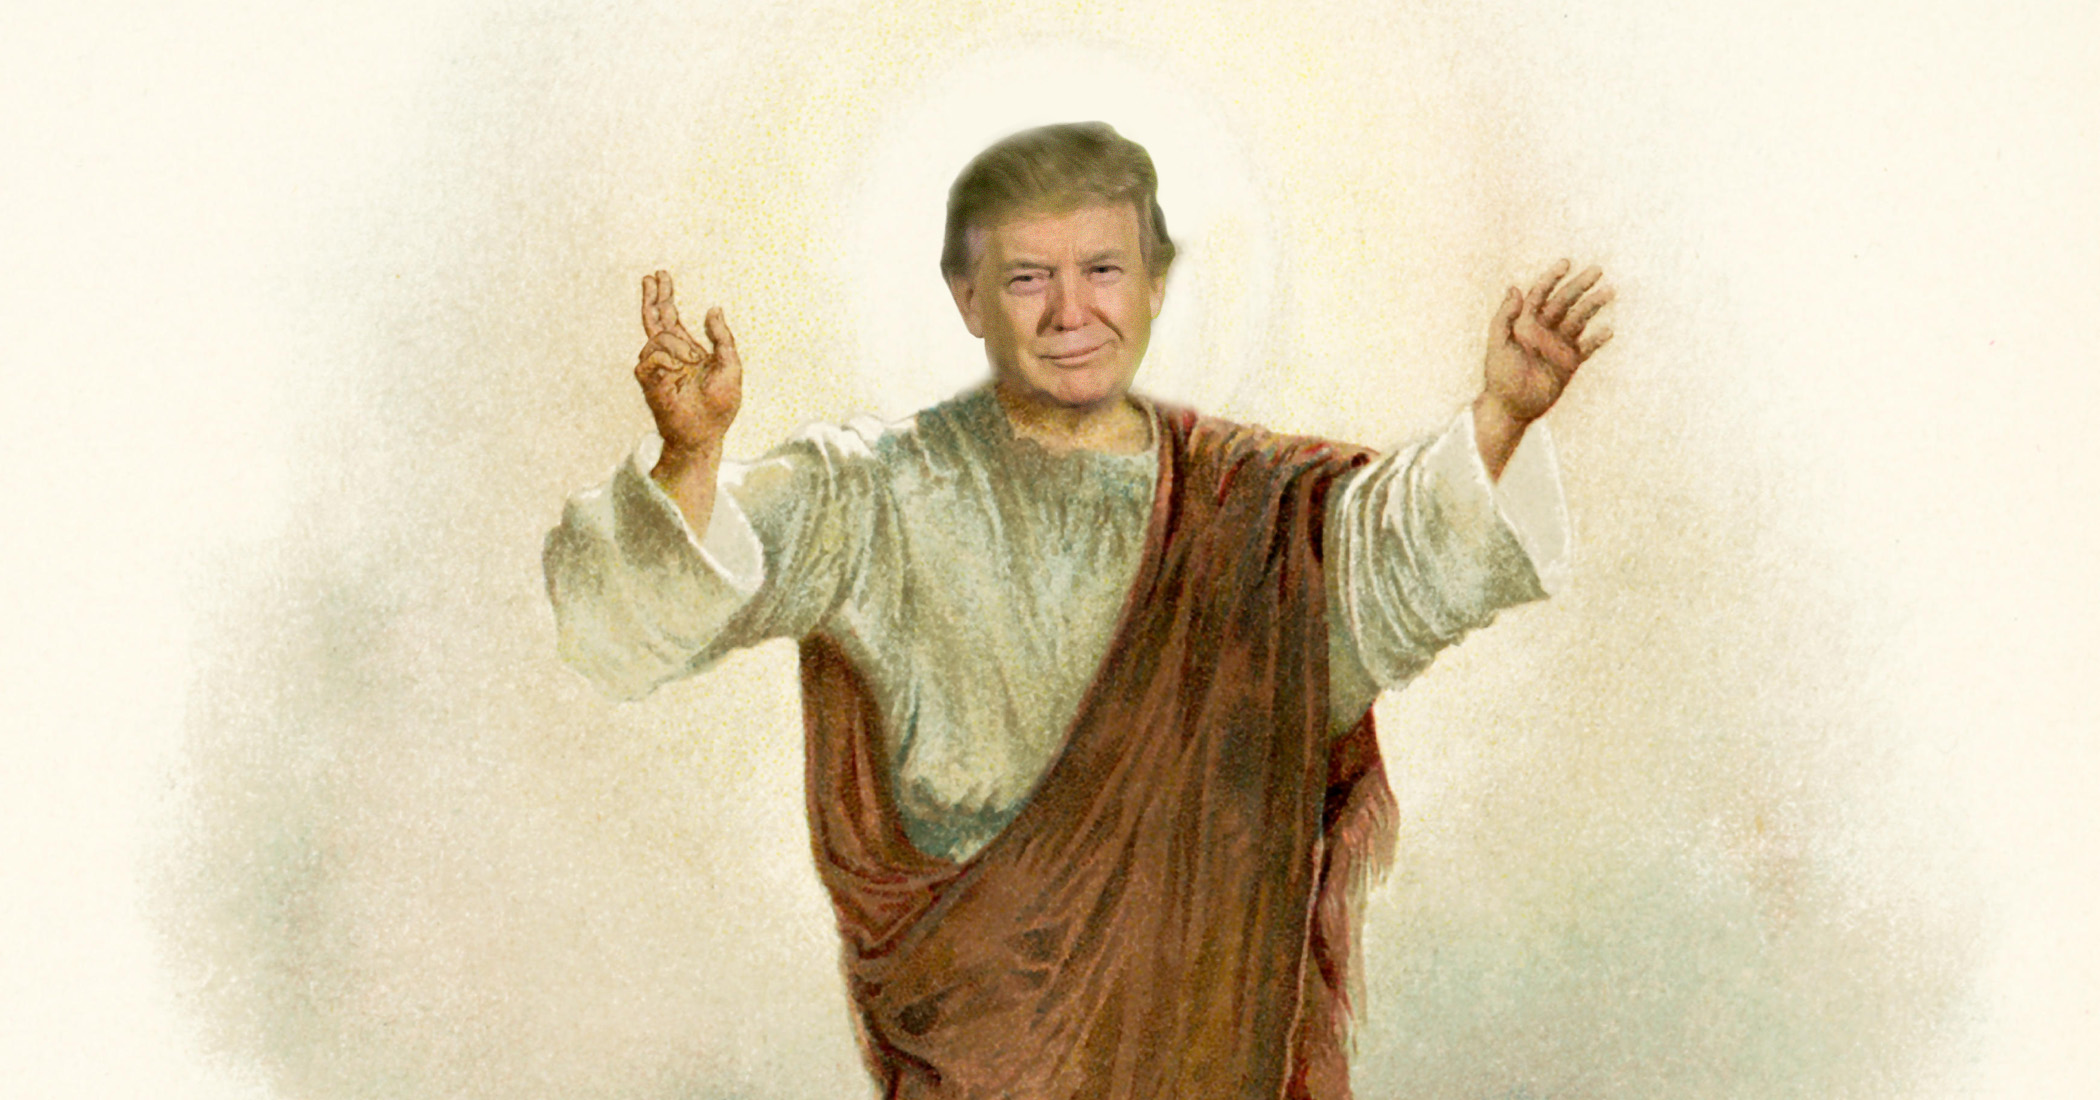 President Trump mashed up with Jesus.